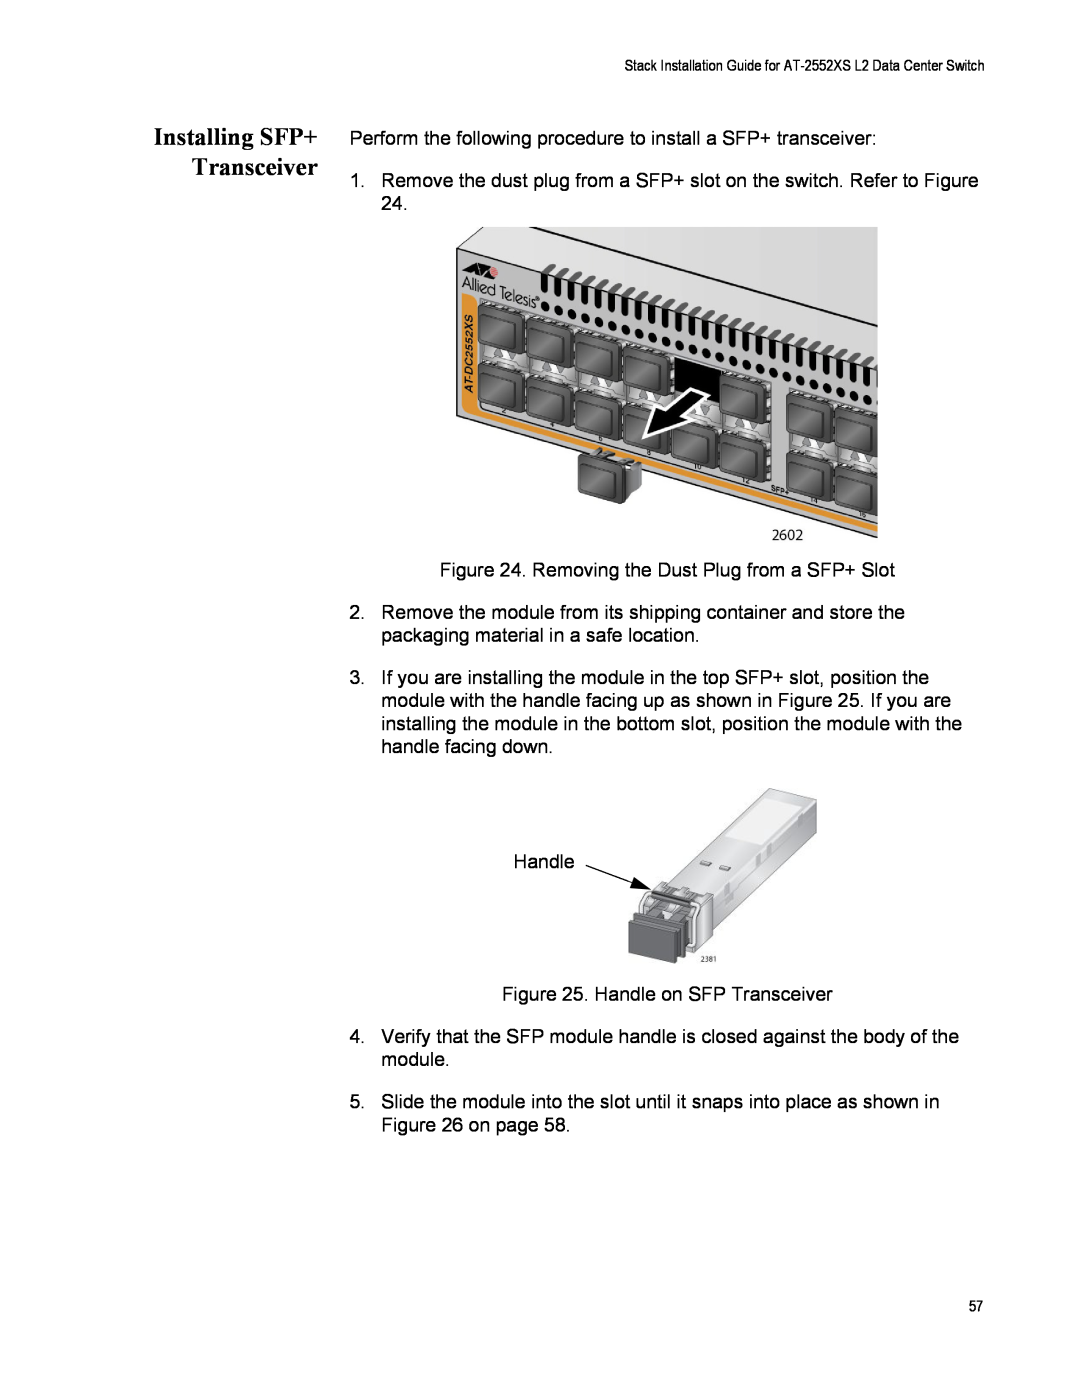 Allied Telesis AT-PWR06, AT-DC2552XS, AT-FAN06 manual Installing SFP+ Transceiver 